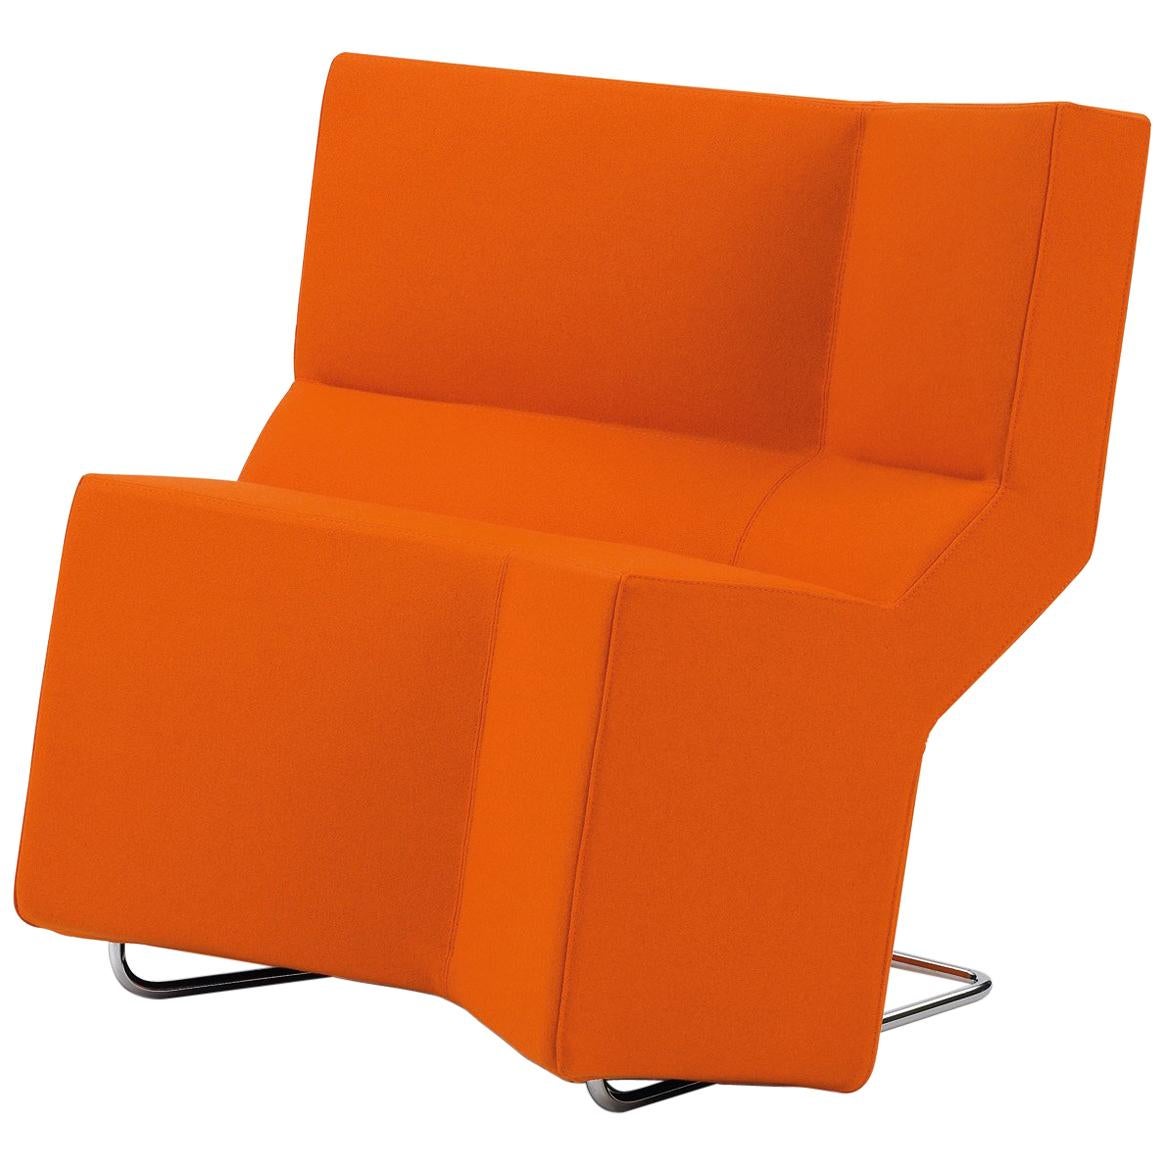 Customizable ClassiCon Chaos Chair  by Konstantin Grcic For Sale